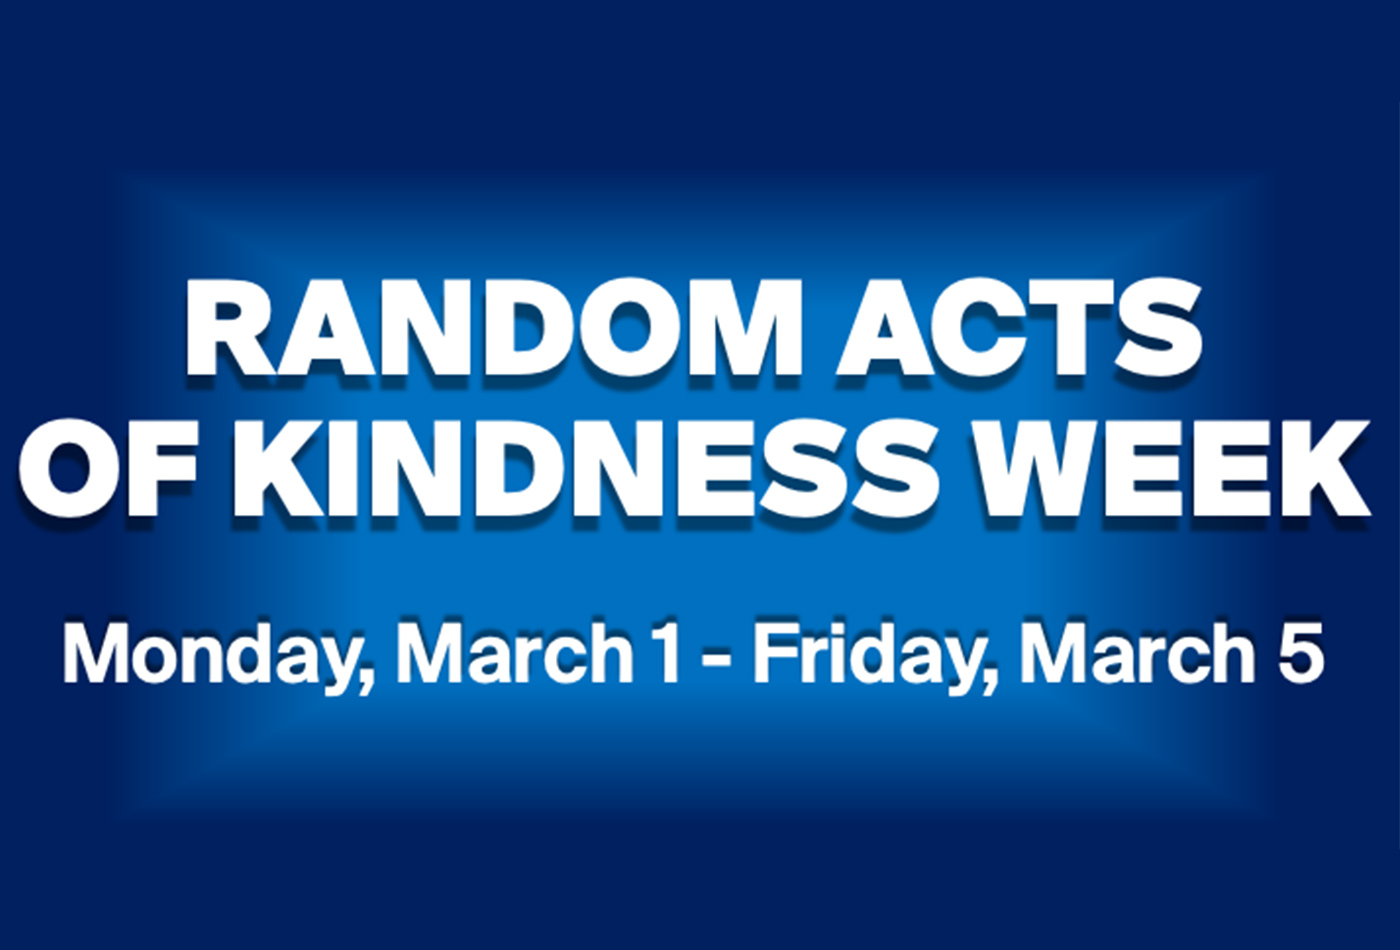 Random Acts of Kindness Week will be from March 1 - March 5, 2021. This graphic depicts that.